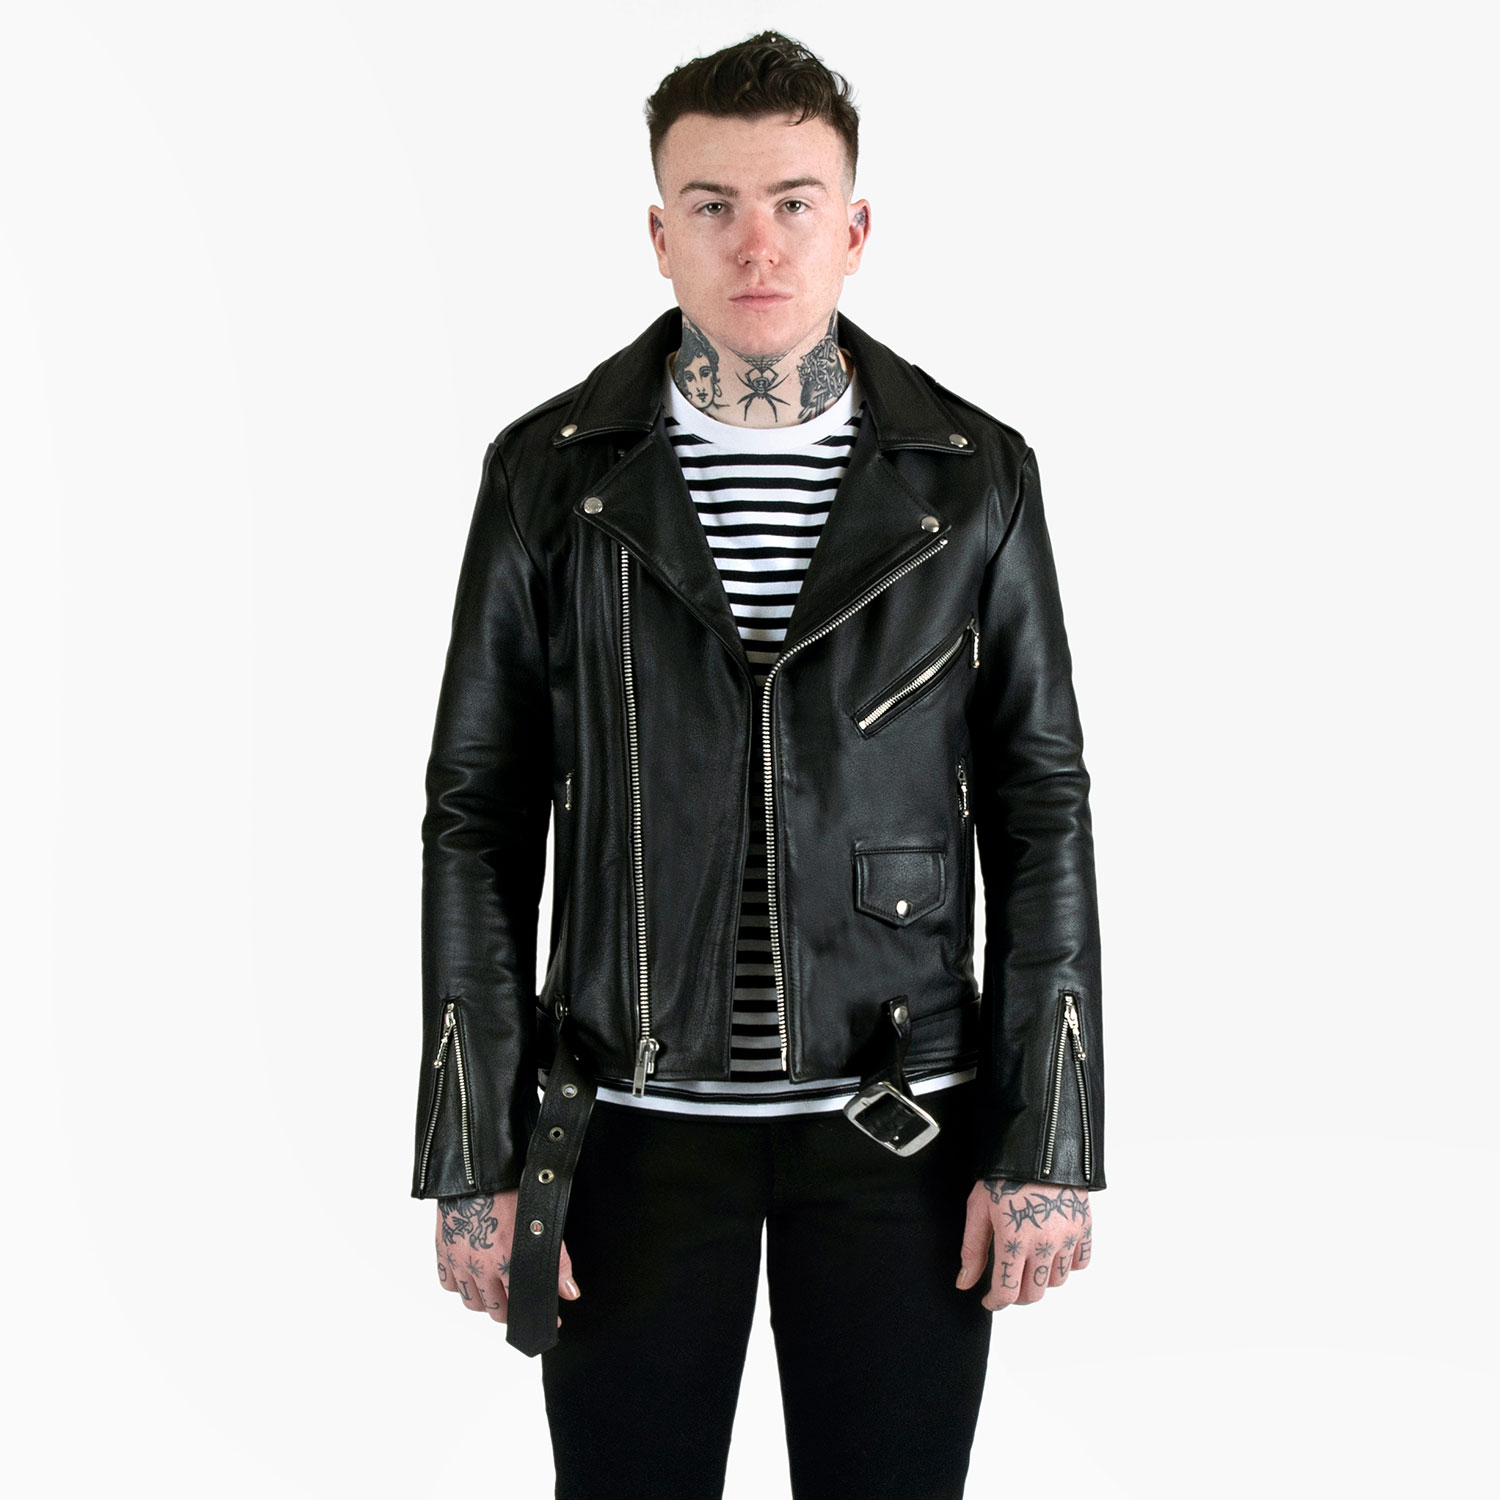 Commando - Black Leather Hell and To Nickel Apparel Jacket Straight 